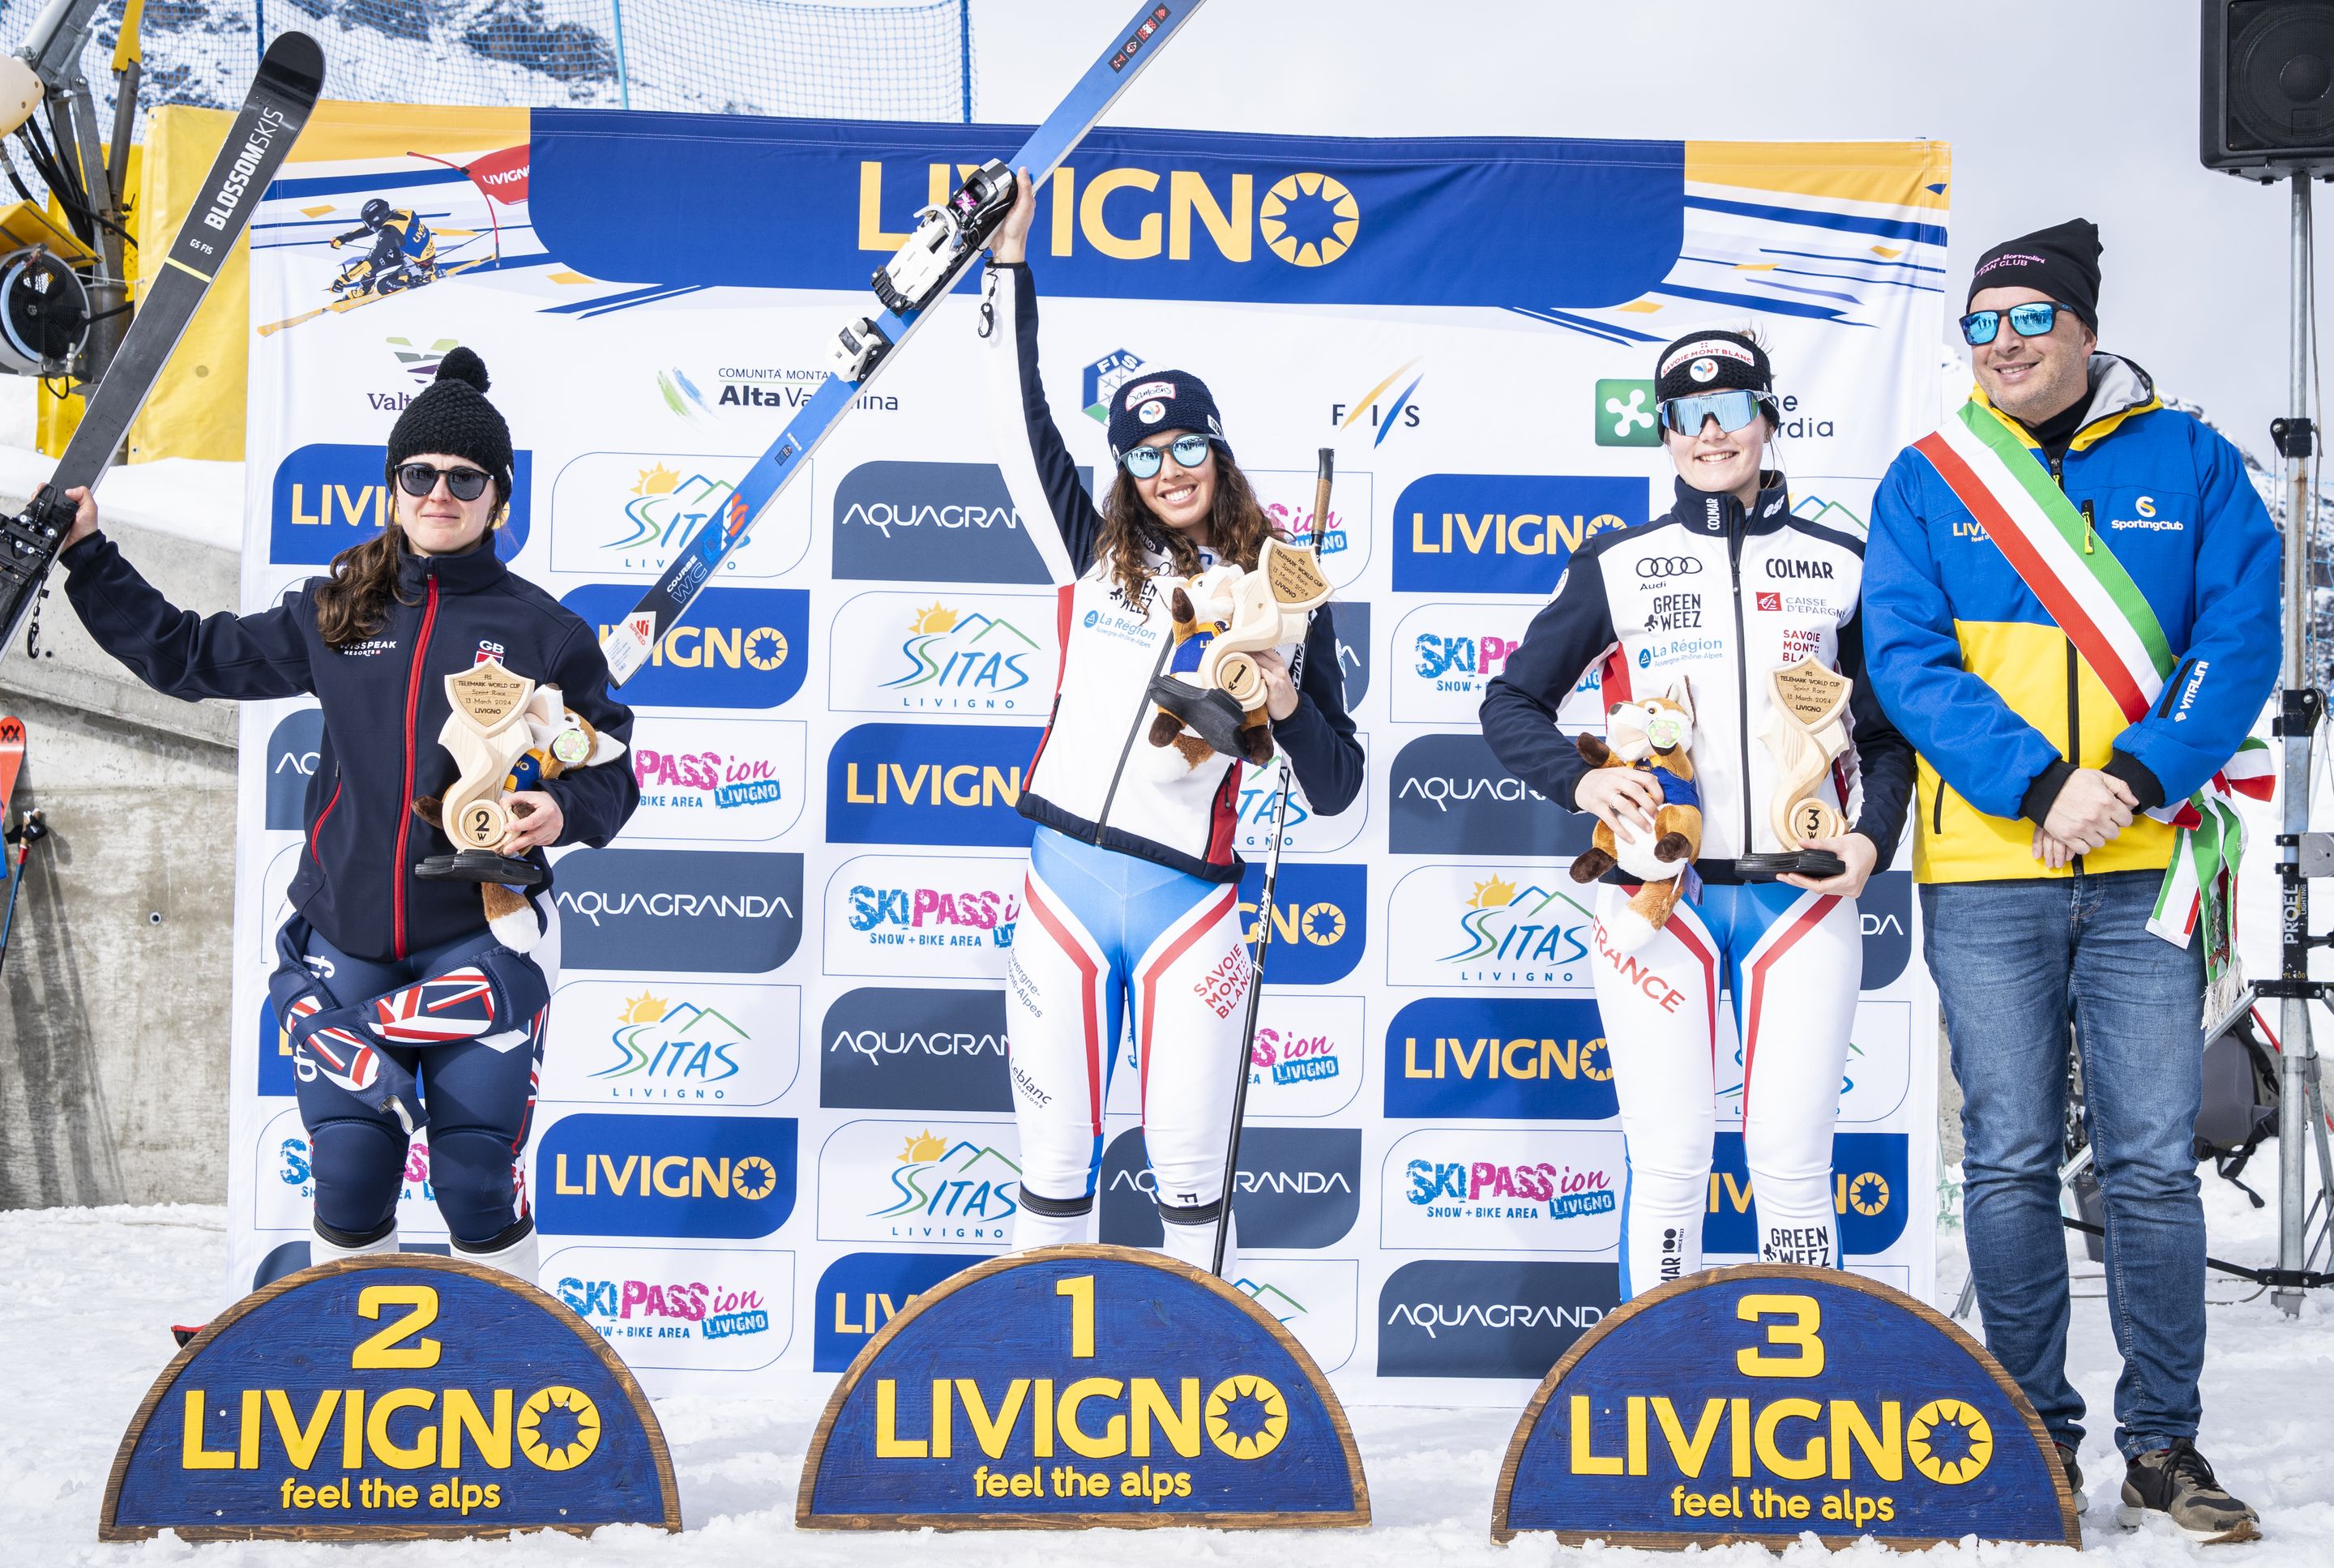 Women's podium of the first Sprint (from left to right): Jasmin Taylor (GBR), Argeline Tan Bouquet (FRA) and Camille Bourbon (FRA)